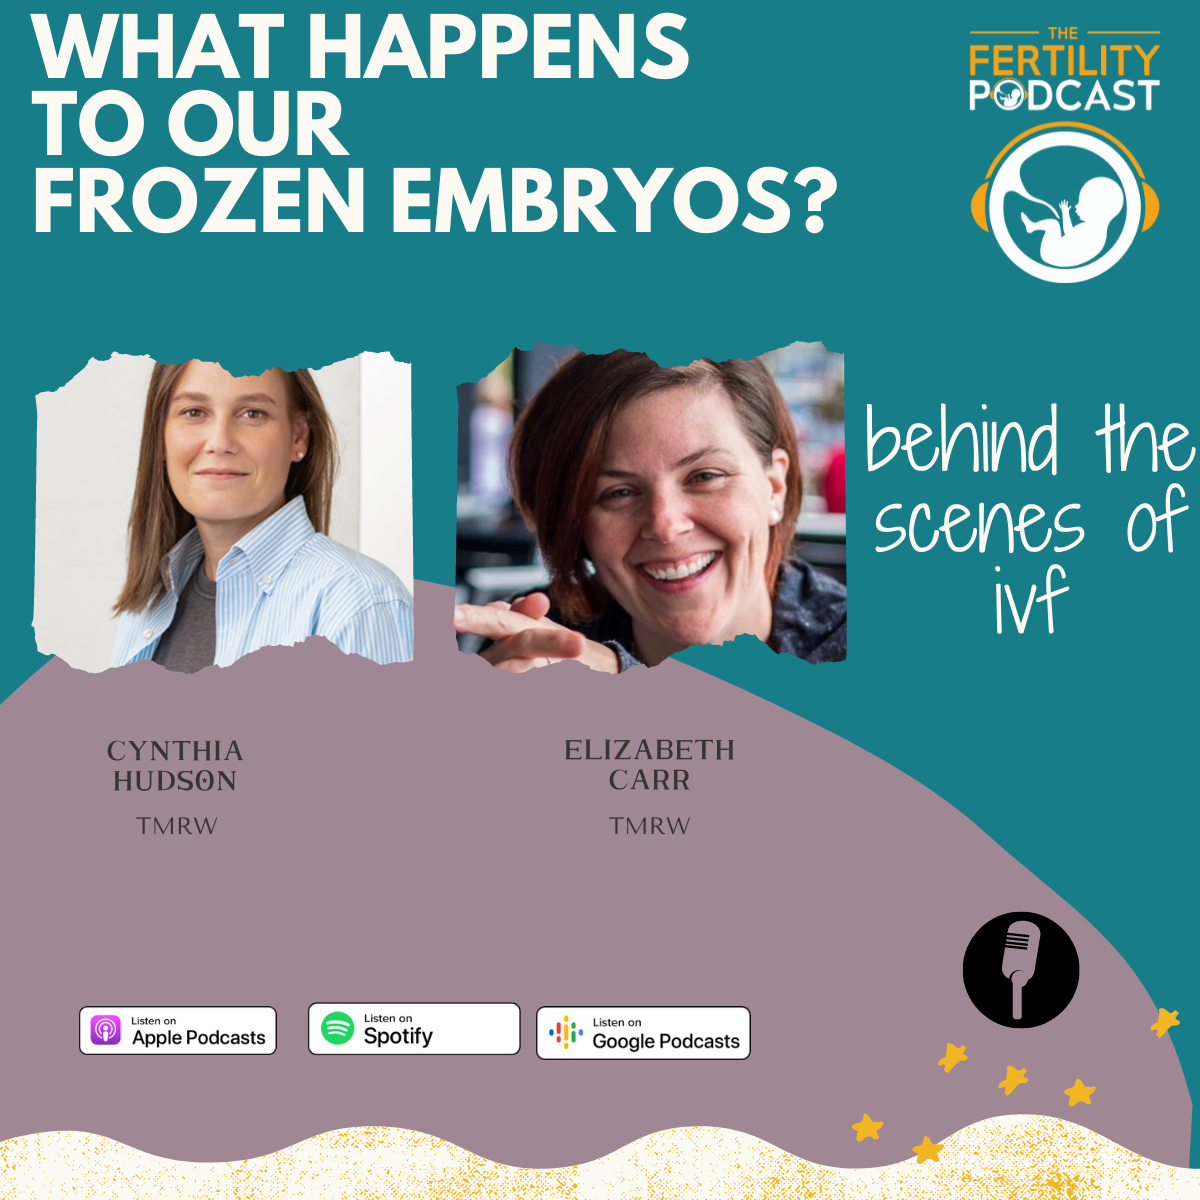 What happens to our frozen embryos?